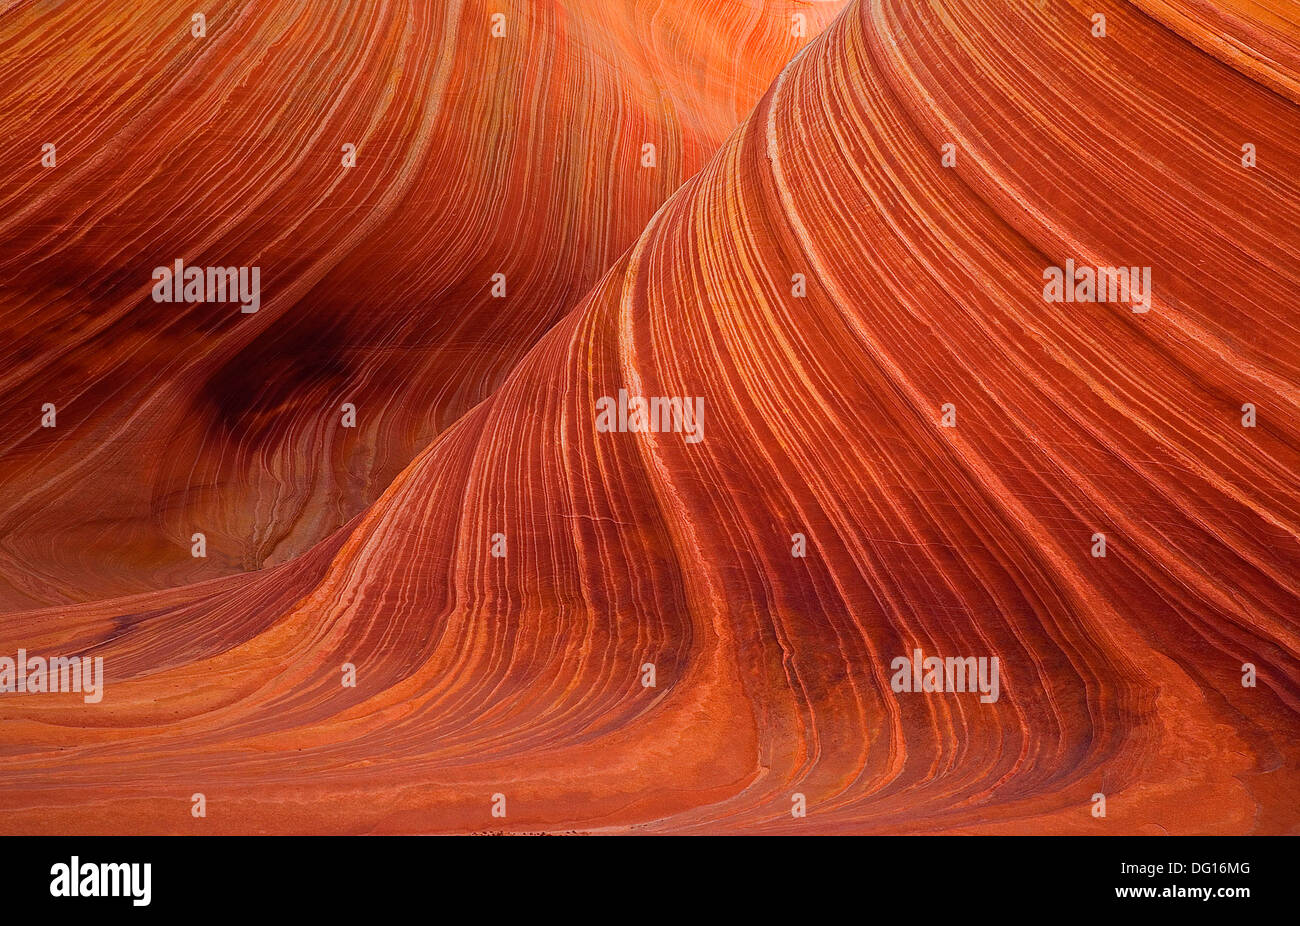 Swirls and curls produce ´The Wave´ at Coyote Buttes on the Arizona/Uyah border. Stock Photo